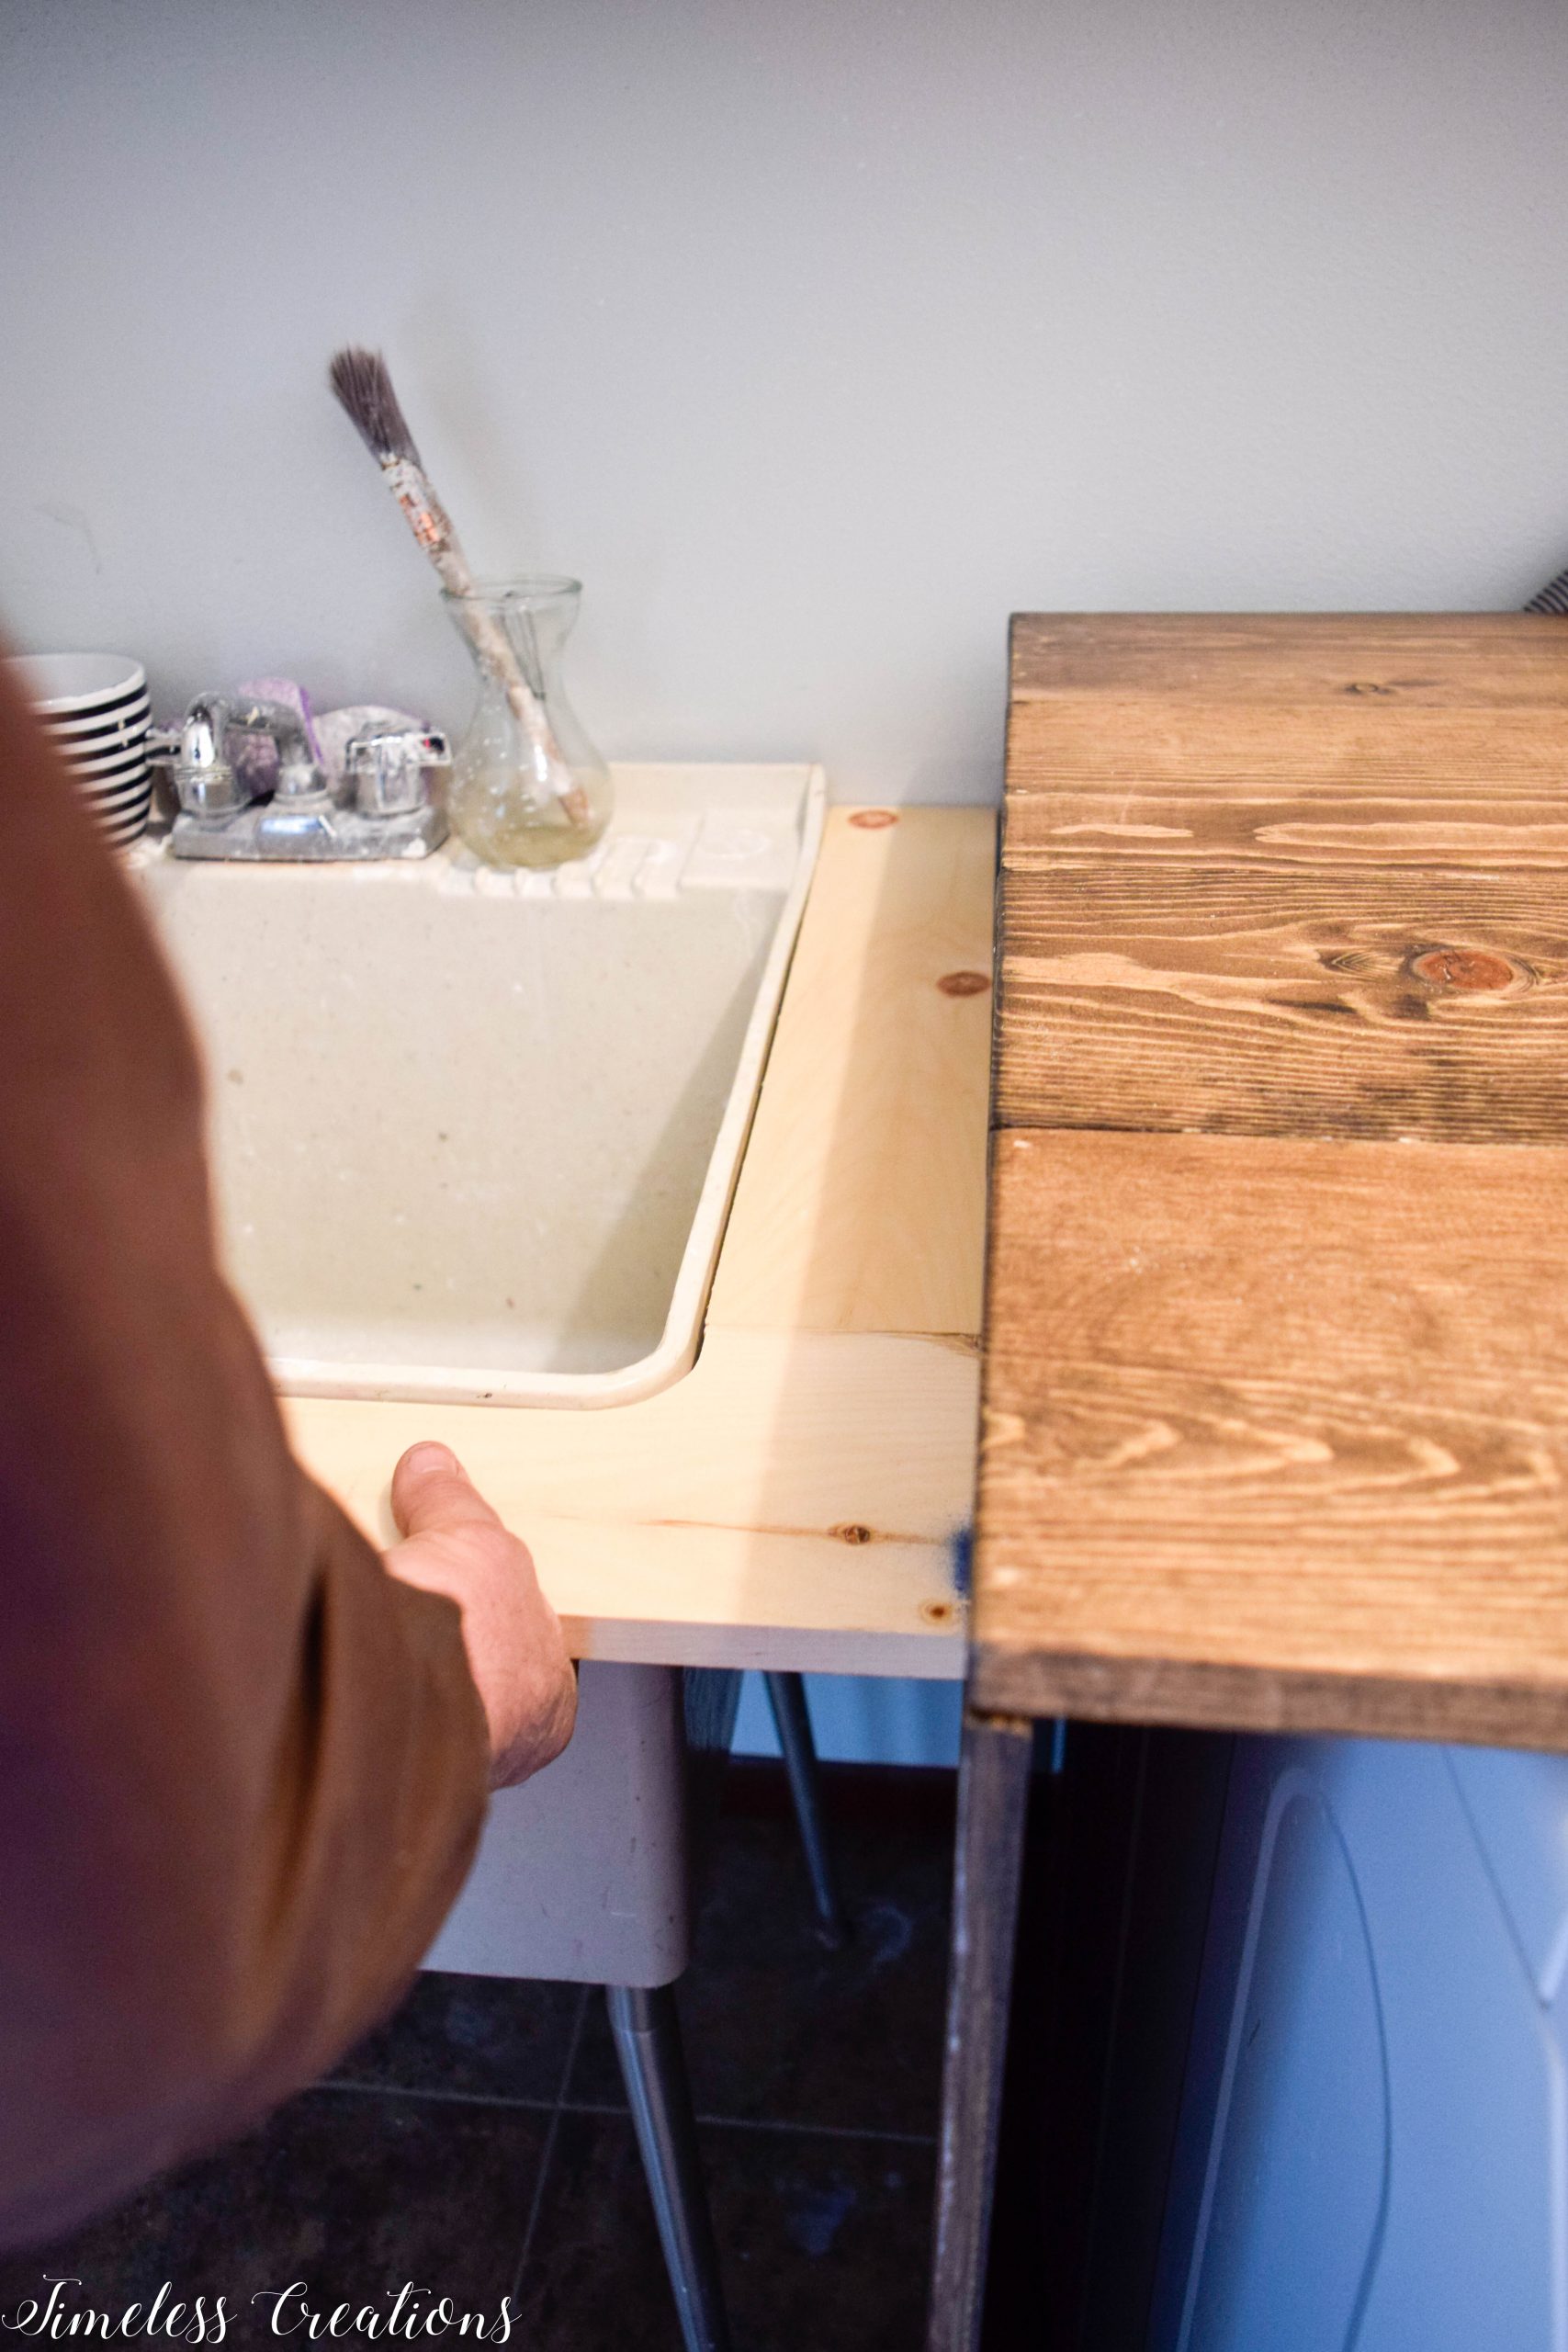 Utility sink doubles your options in the kitchen